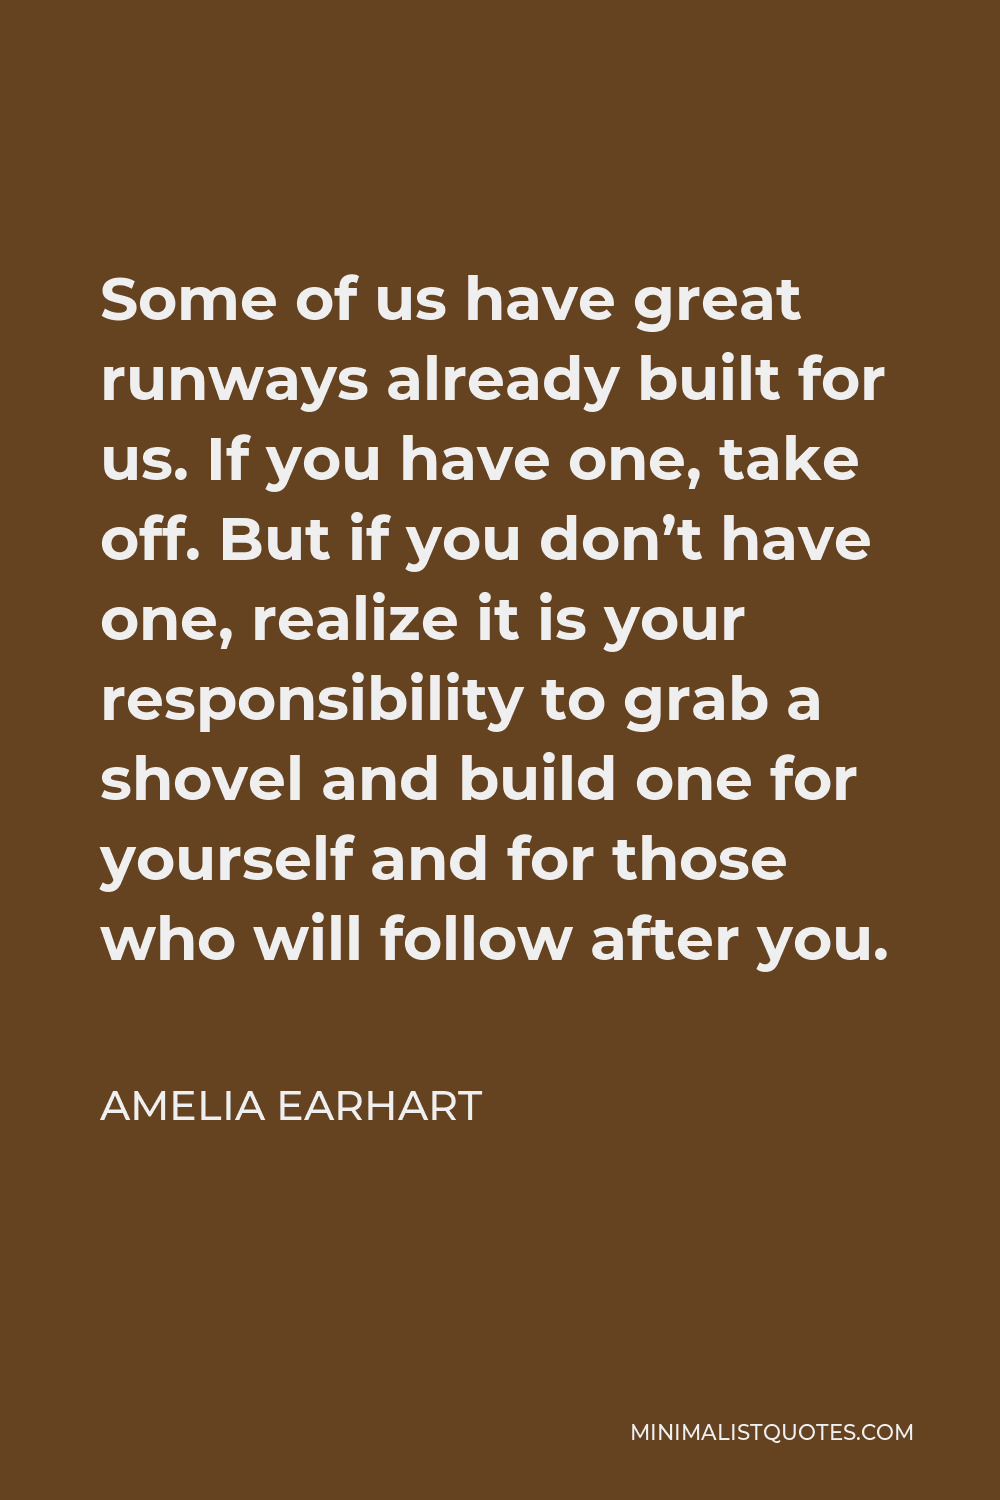 Amelia Earhart Quote: Some of us have great runways already built for ...